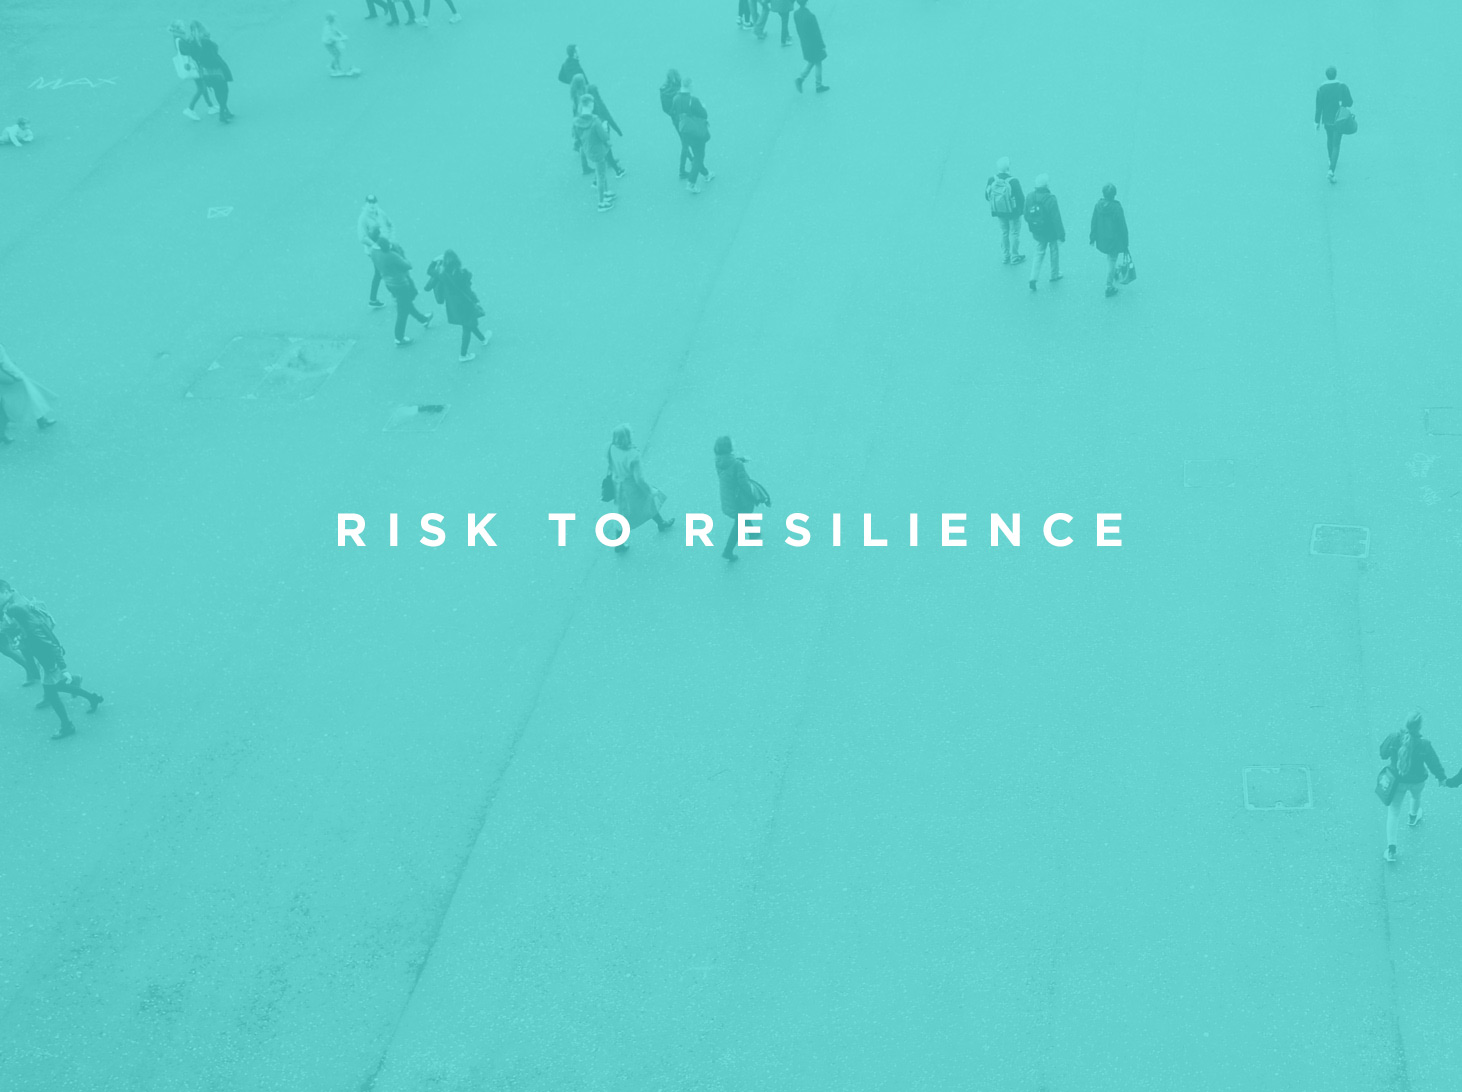 Moving from risk to resilience